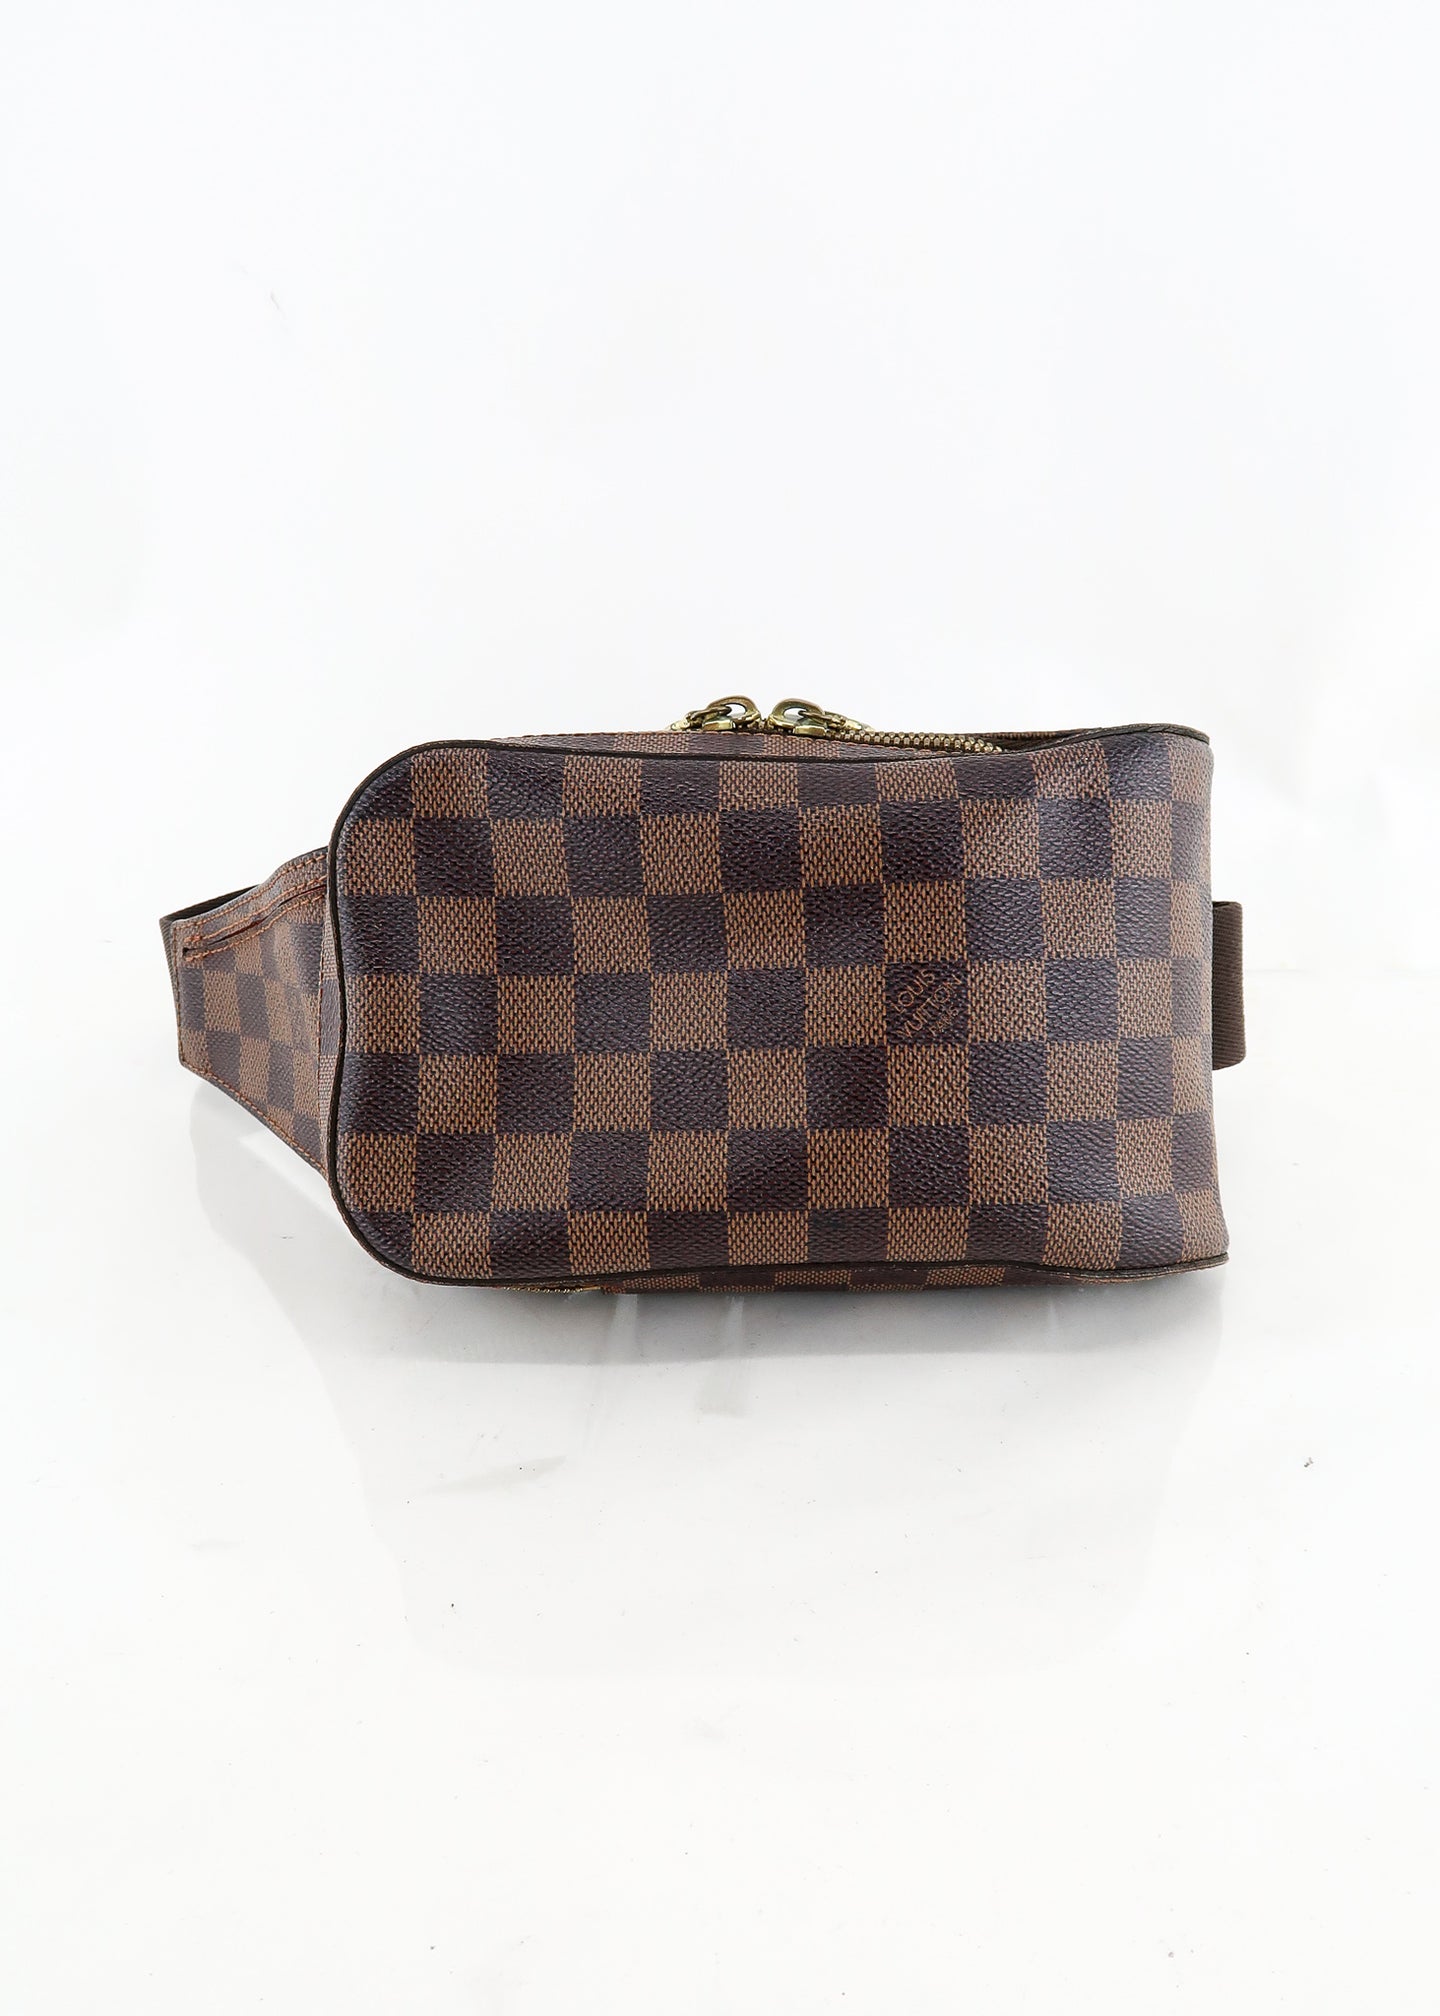 Louis Vuitton - Authenticated Geronimo Handbag - Leather Brown for Women, Very Good Condition